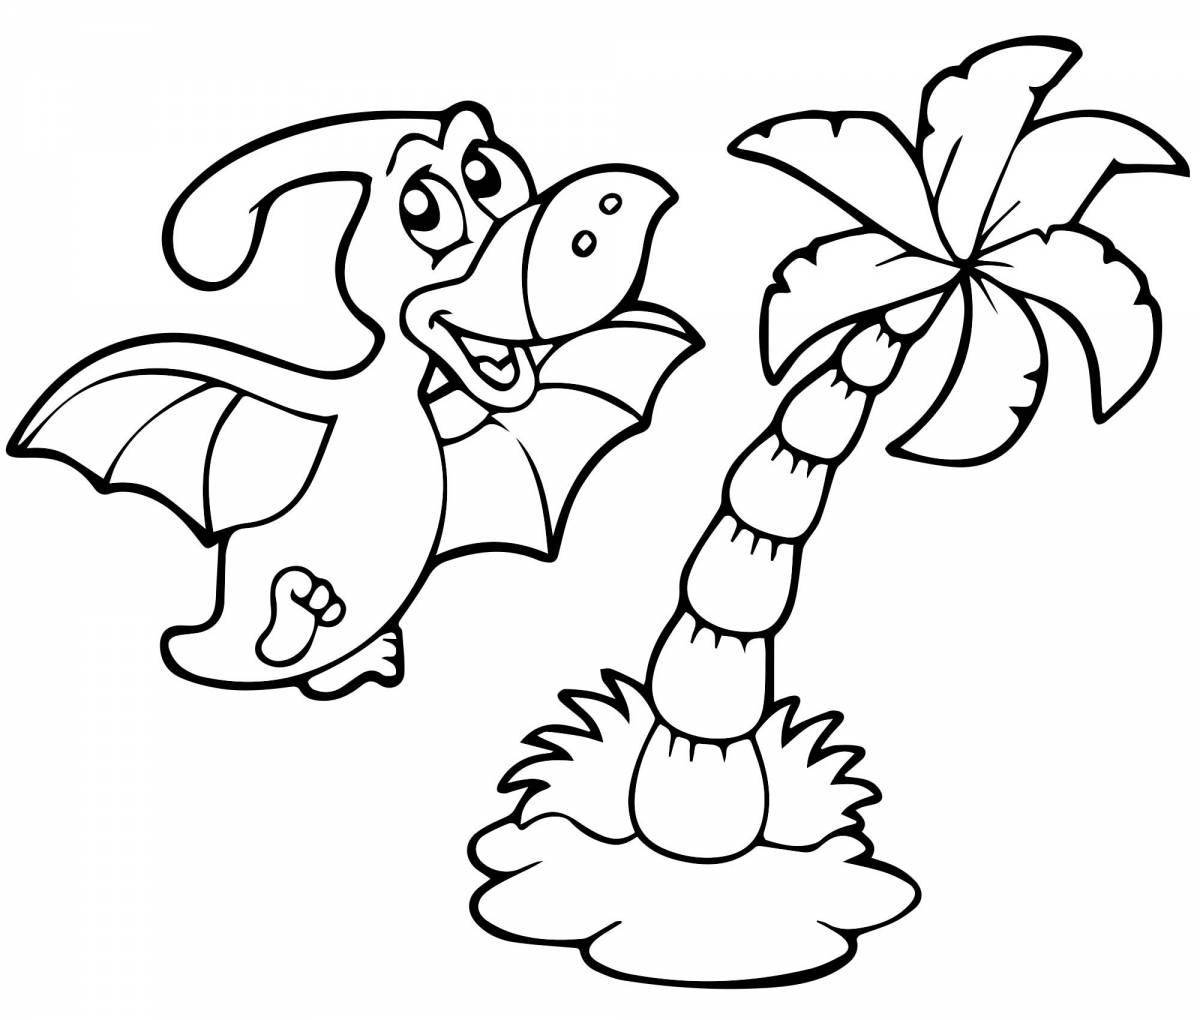 Adorable dinosaur coloring book for girls